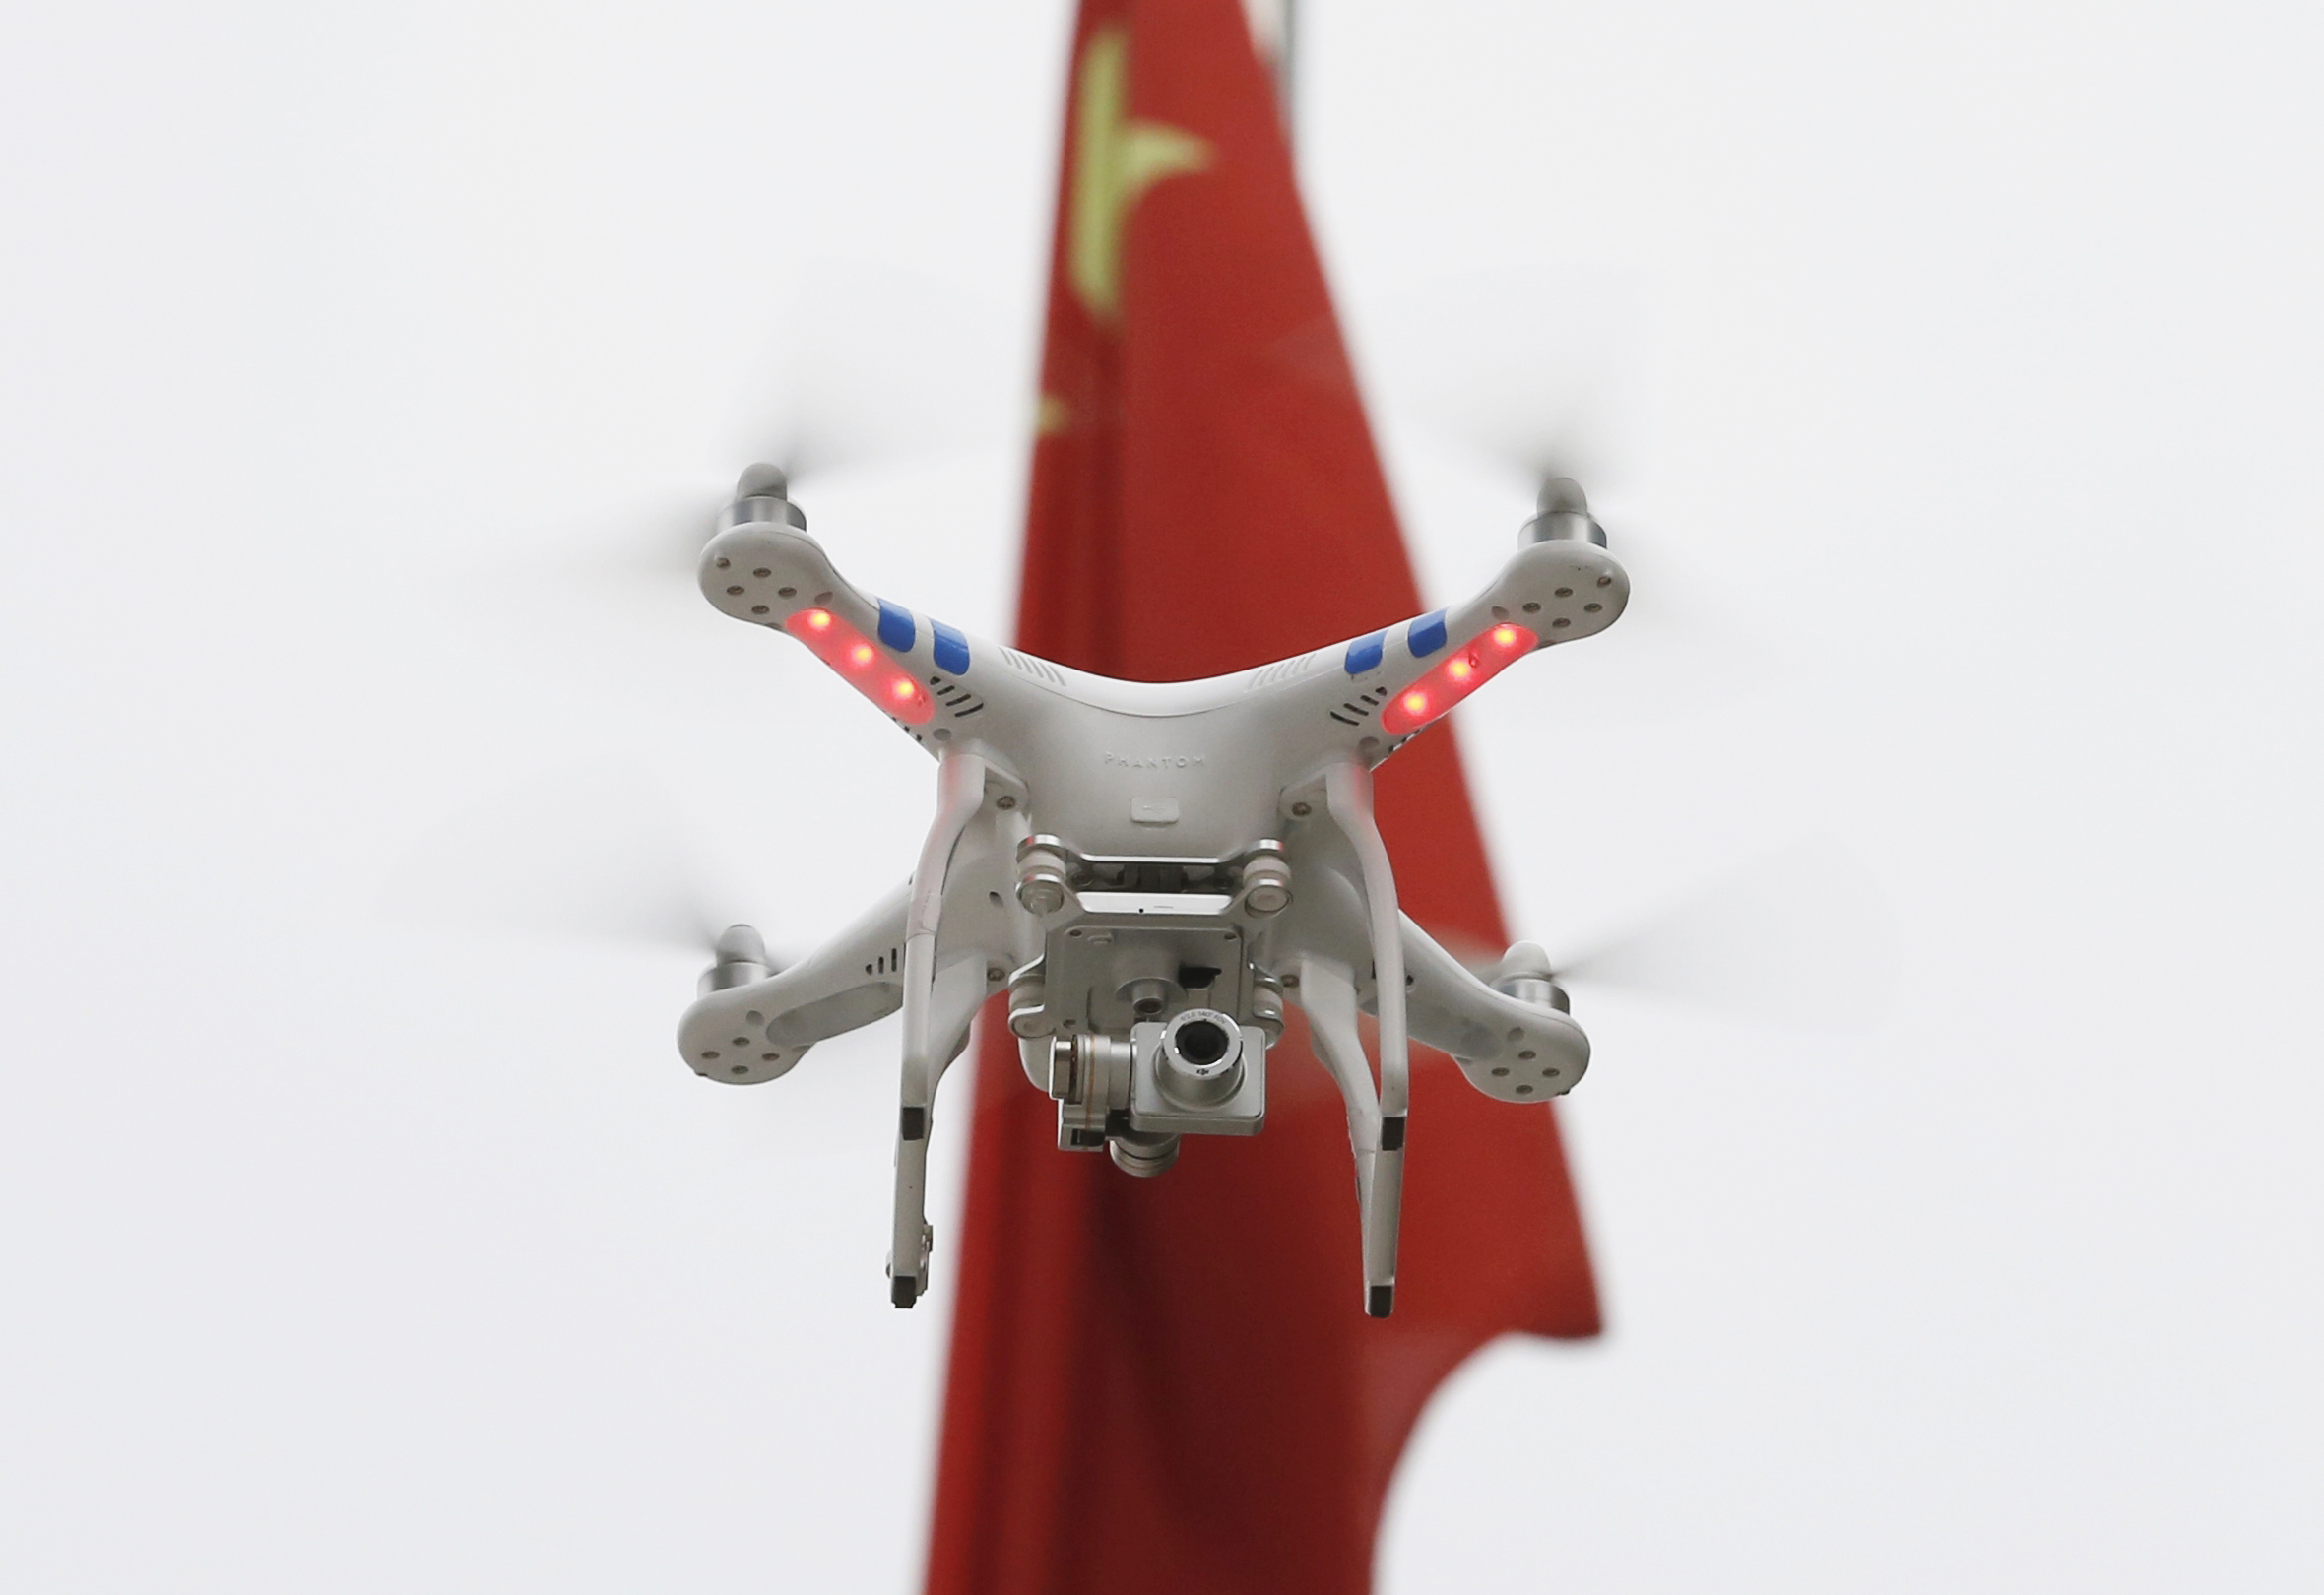 DJI will get its own channel on Youku to extend its reach in China. Photo: AP